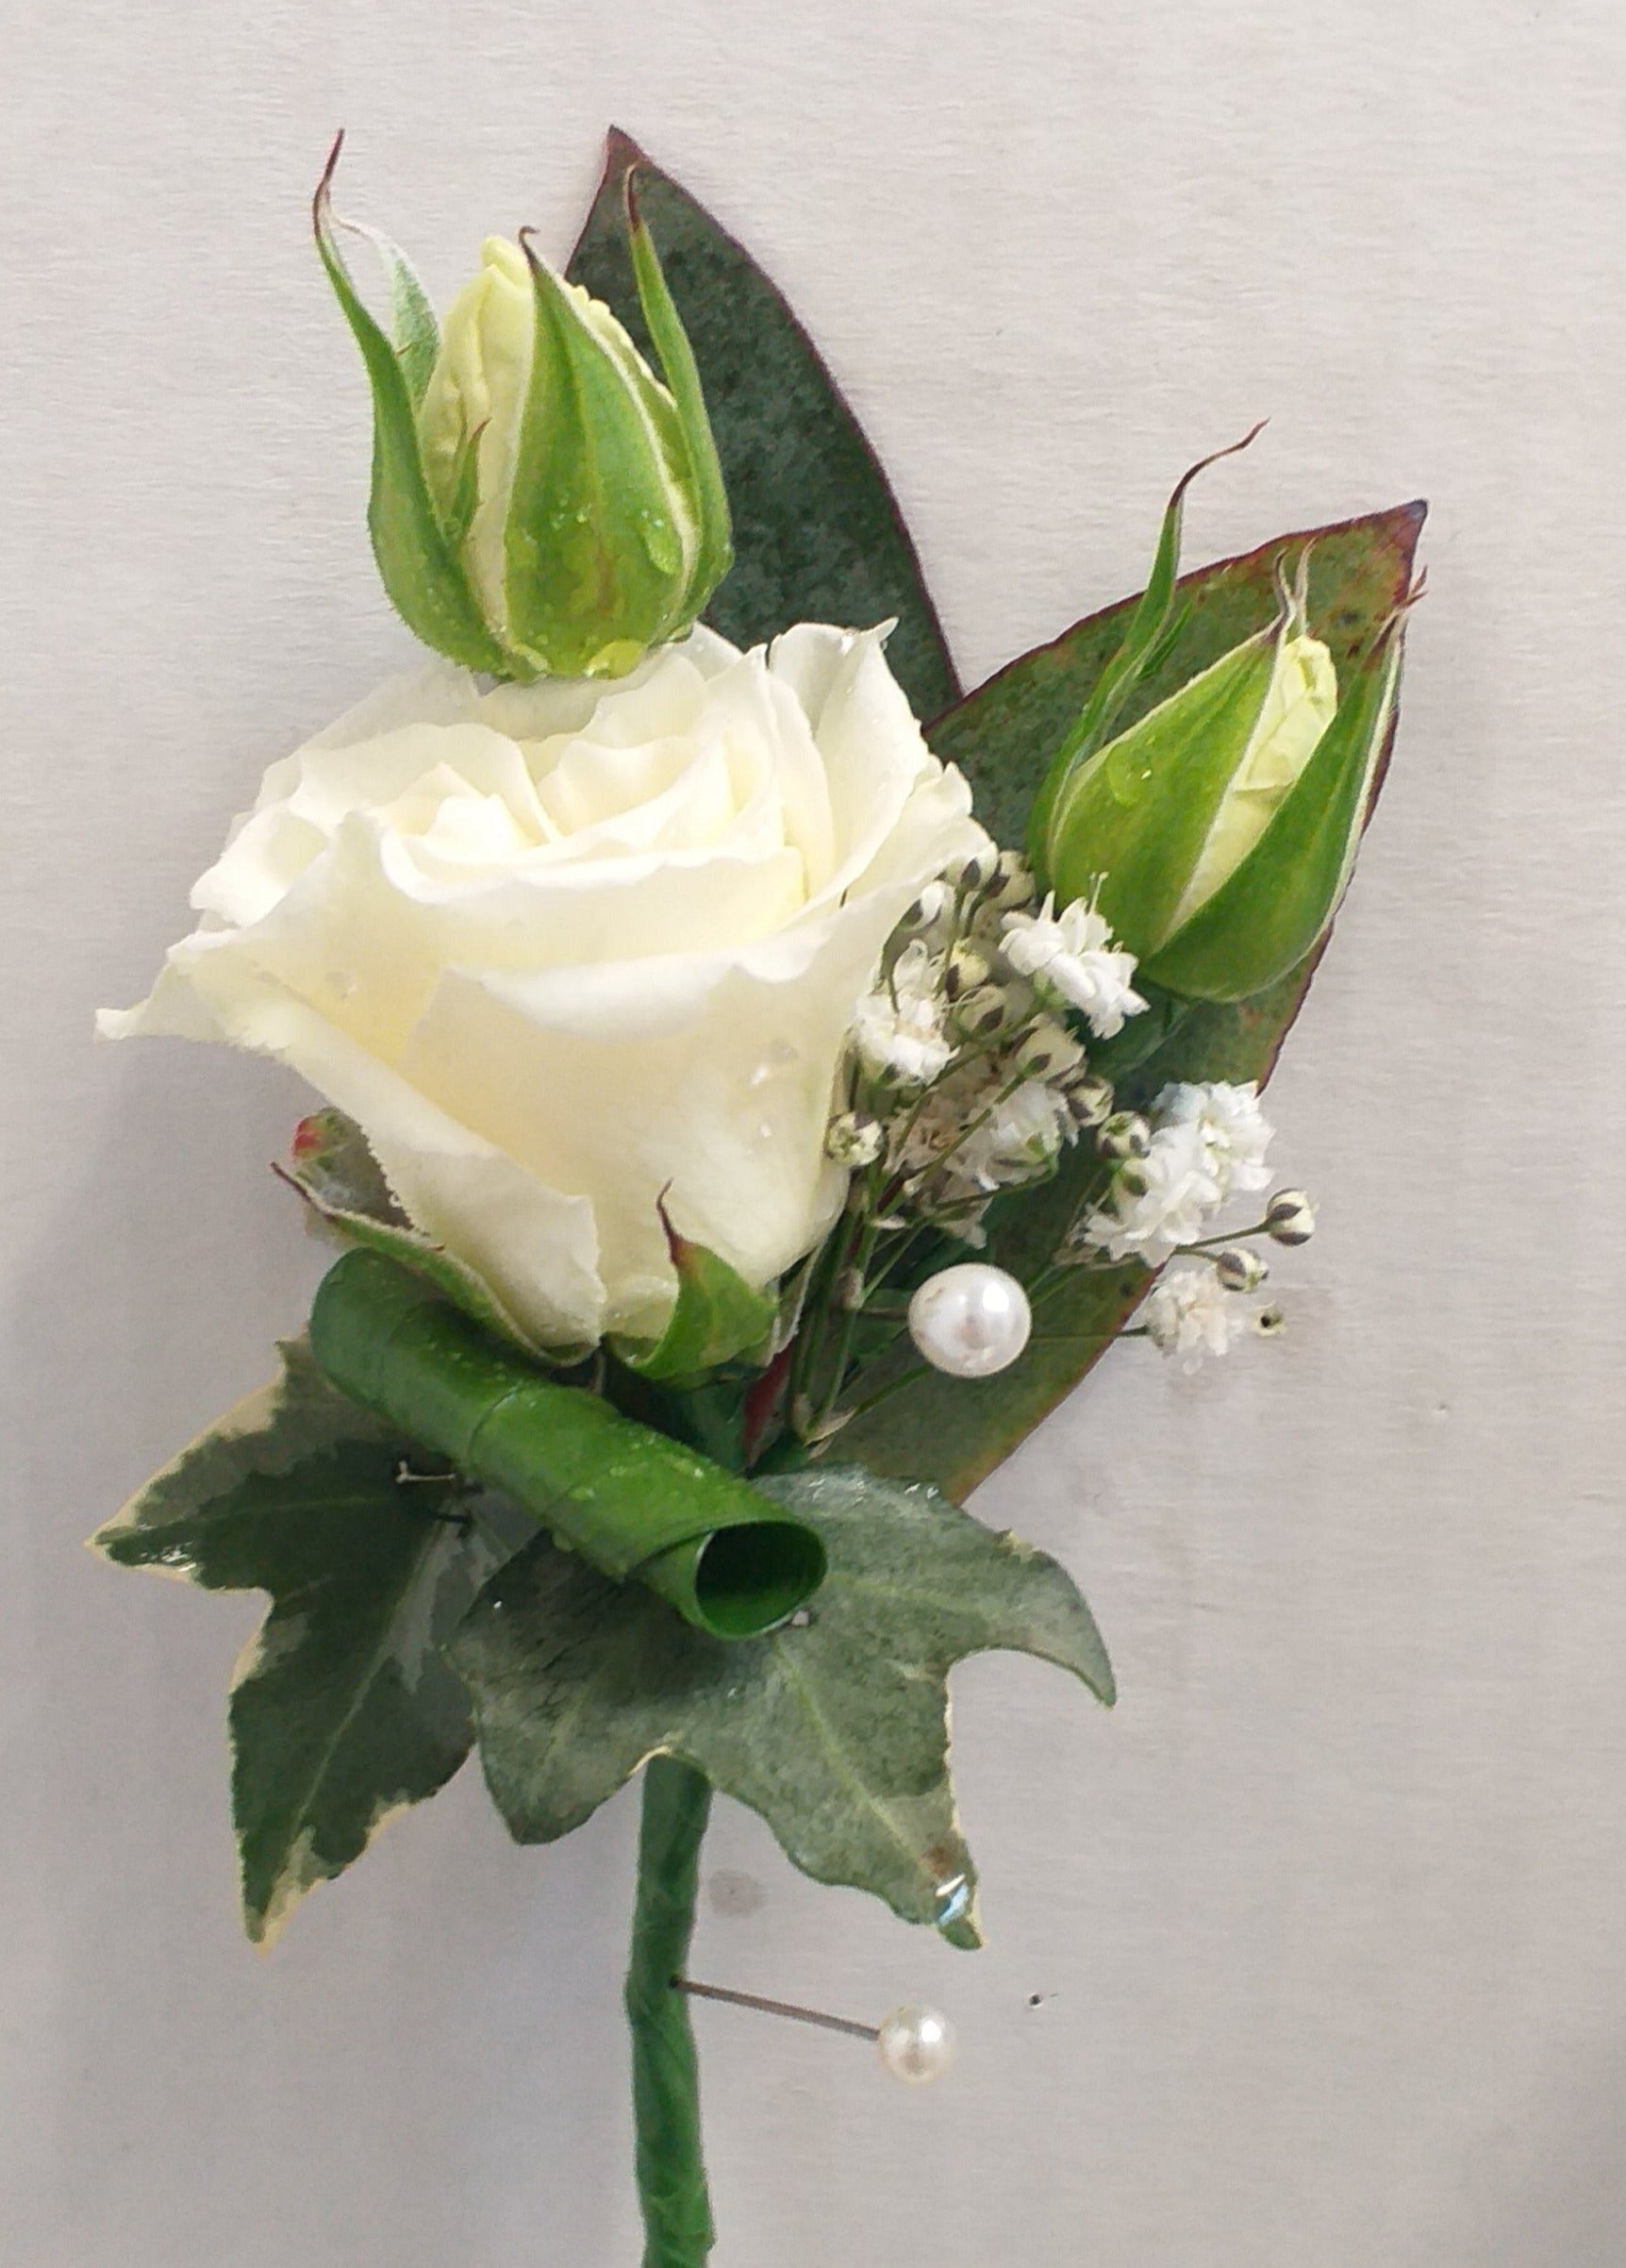 Lady's buttonhole or Boutonniere, white spray rose and buds, gypsophila and leaves